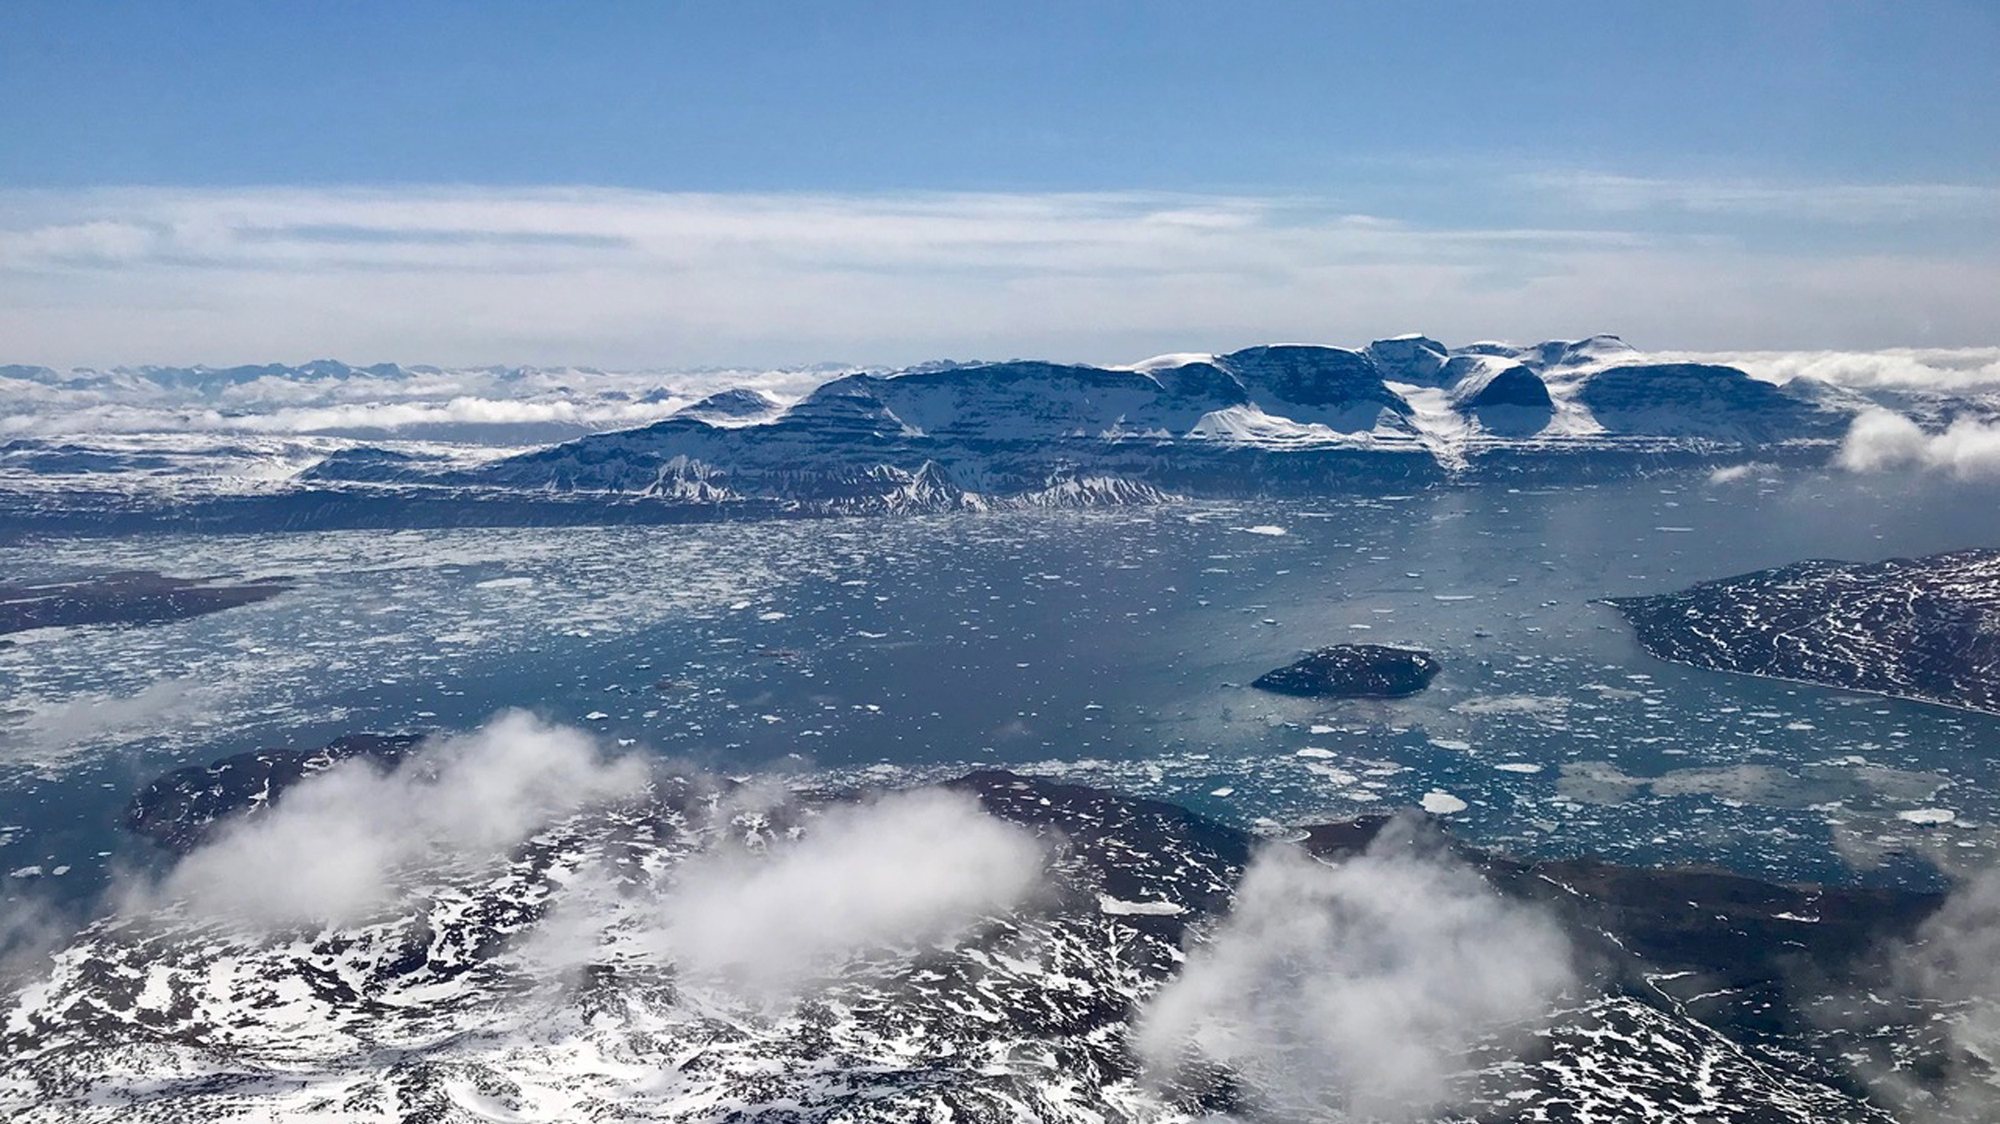 epa06730116 A handout photo made available by NASA on 12 May 2018 shows small puffy cumulus clouds in the foreground, with sea ice, open water and a fjord wall in the background in southern Greenland, 29 April 2018, seen during an operation IceBridge survey flight. Operation IceBridge is NASA&#039;s longest-running airborne mission to monitor polar ice change. This year&#039;s springtime survey of Arctic sea and land ice began on 22 March and will conclude on 02 May. The flights covered the western basin of the Arctic Ocean and Greenland&#039;s fastest-changing glaciers.  EPA/NASA/LINETTE BOISVERT HANDOUT  HANDOUT EDITORIAL USE ONLY/NO SALES